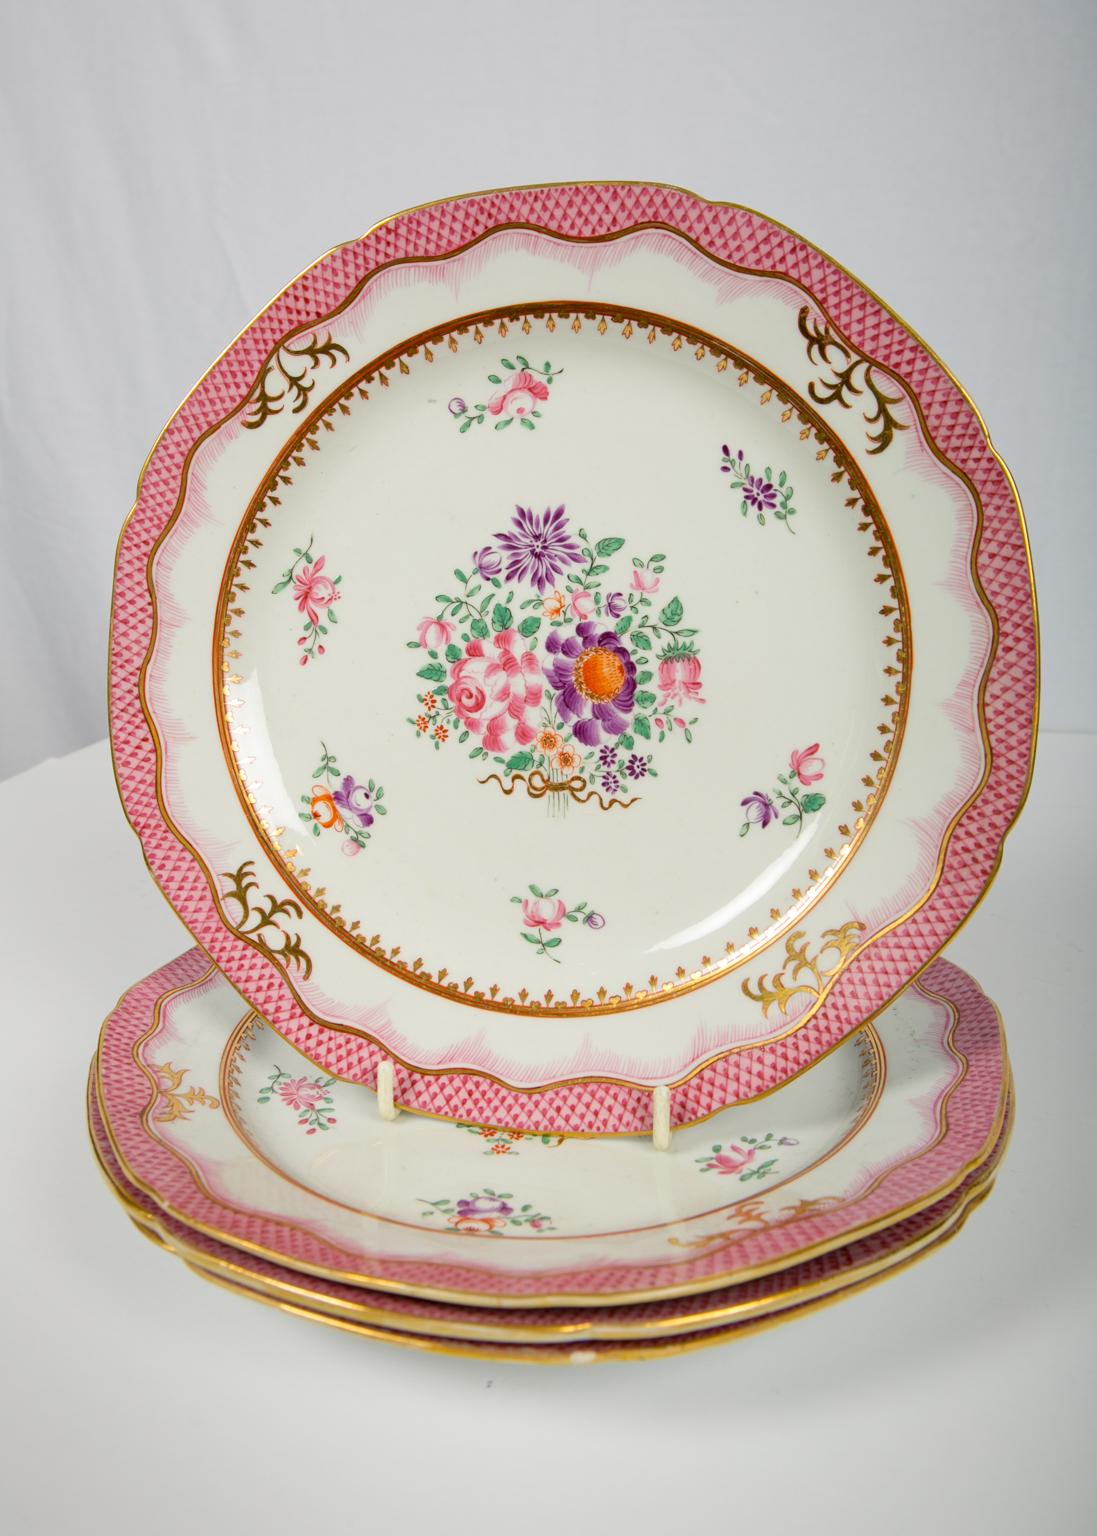 Four Pink Antique Worcester Dishes in the Famille Rose Style 1